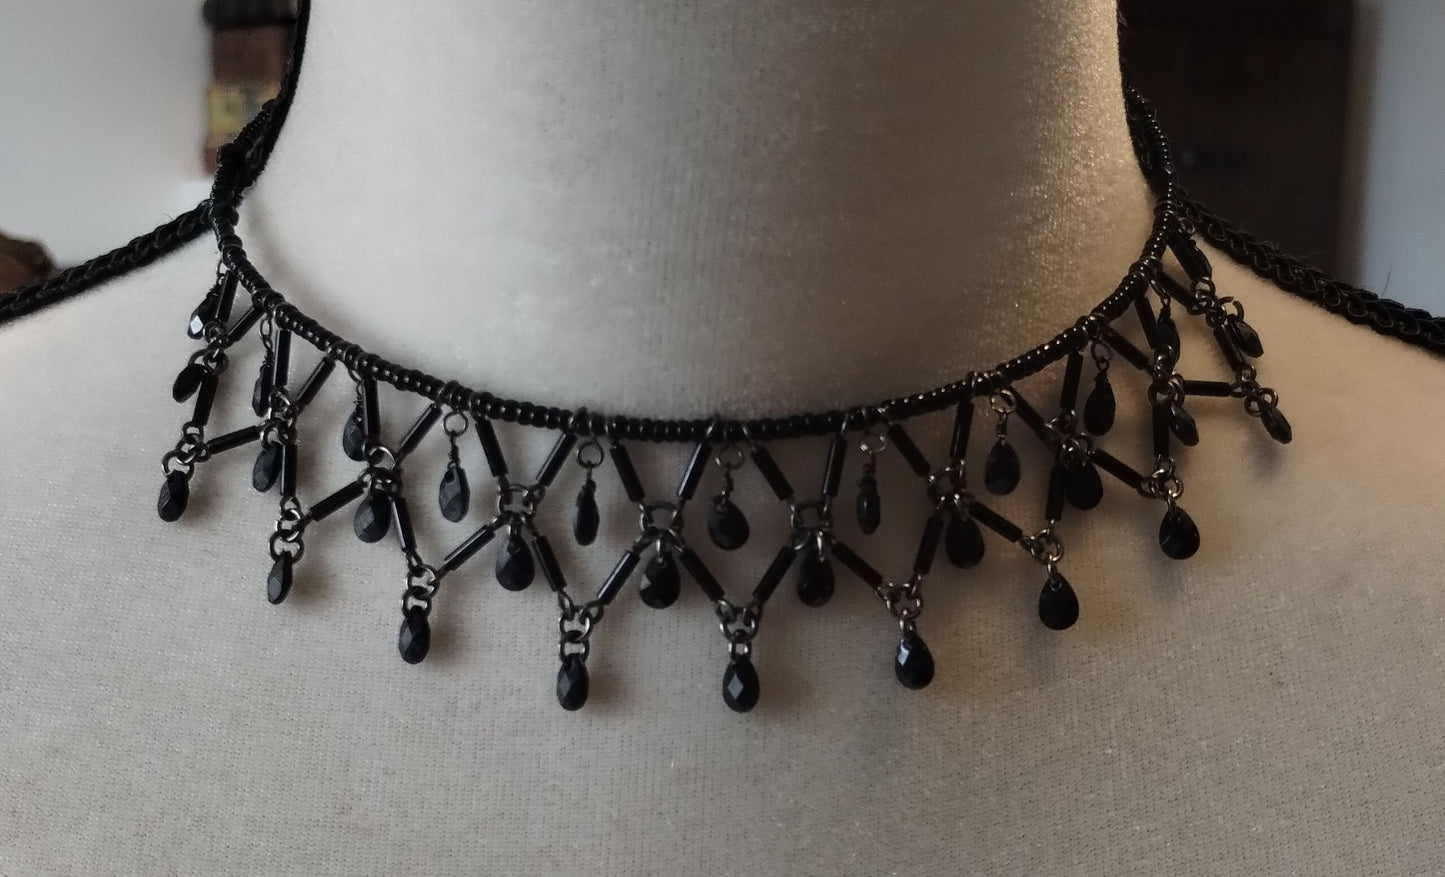 Vintage Black Seed Bead Wire Choker Necklace